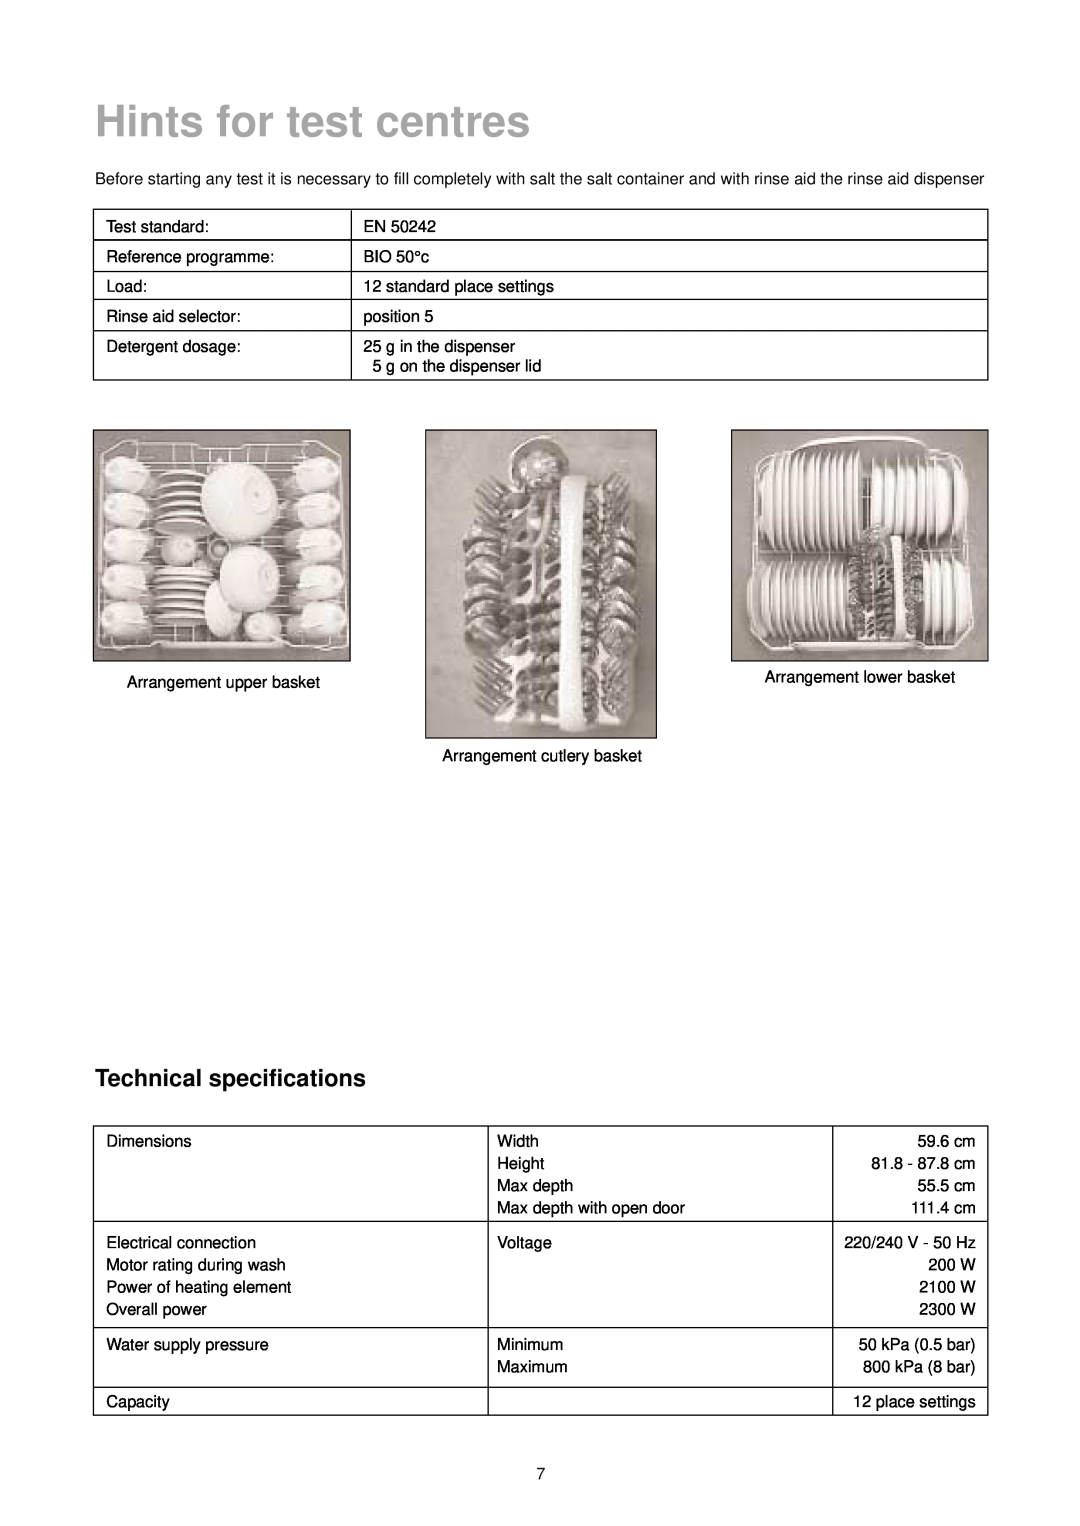 Zanussi ZT 6905 manual Hints for test centres, Technical specifications 